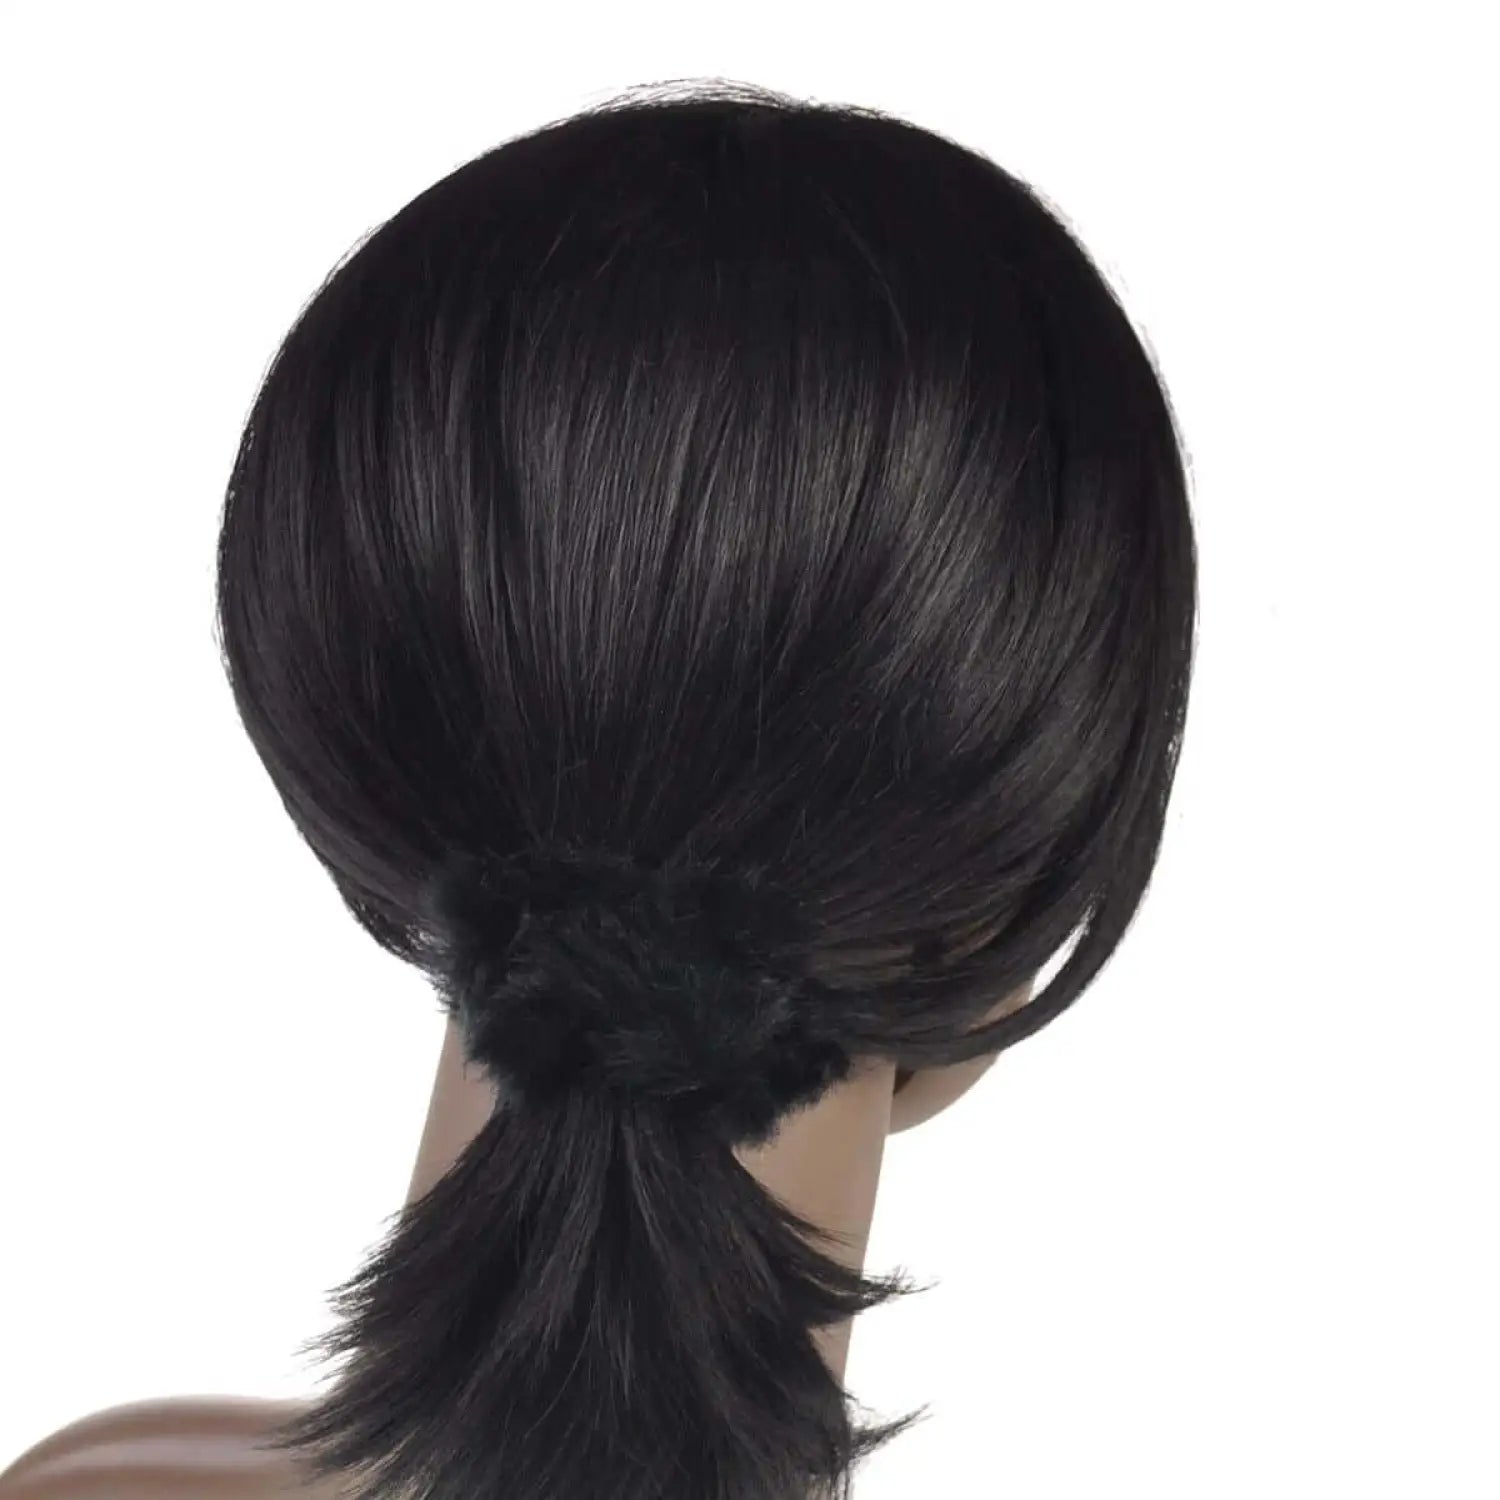 Mini Soft Faux Fur Scrunchie: Close-up of woman with black hair style